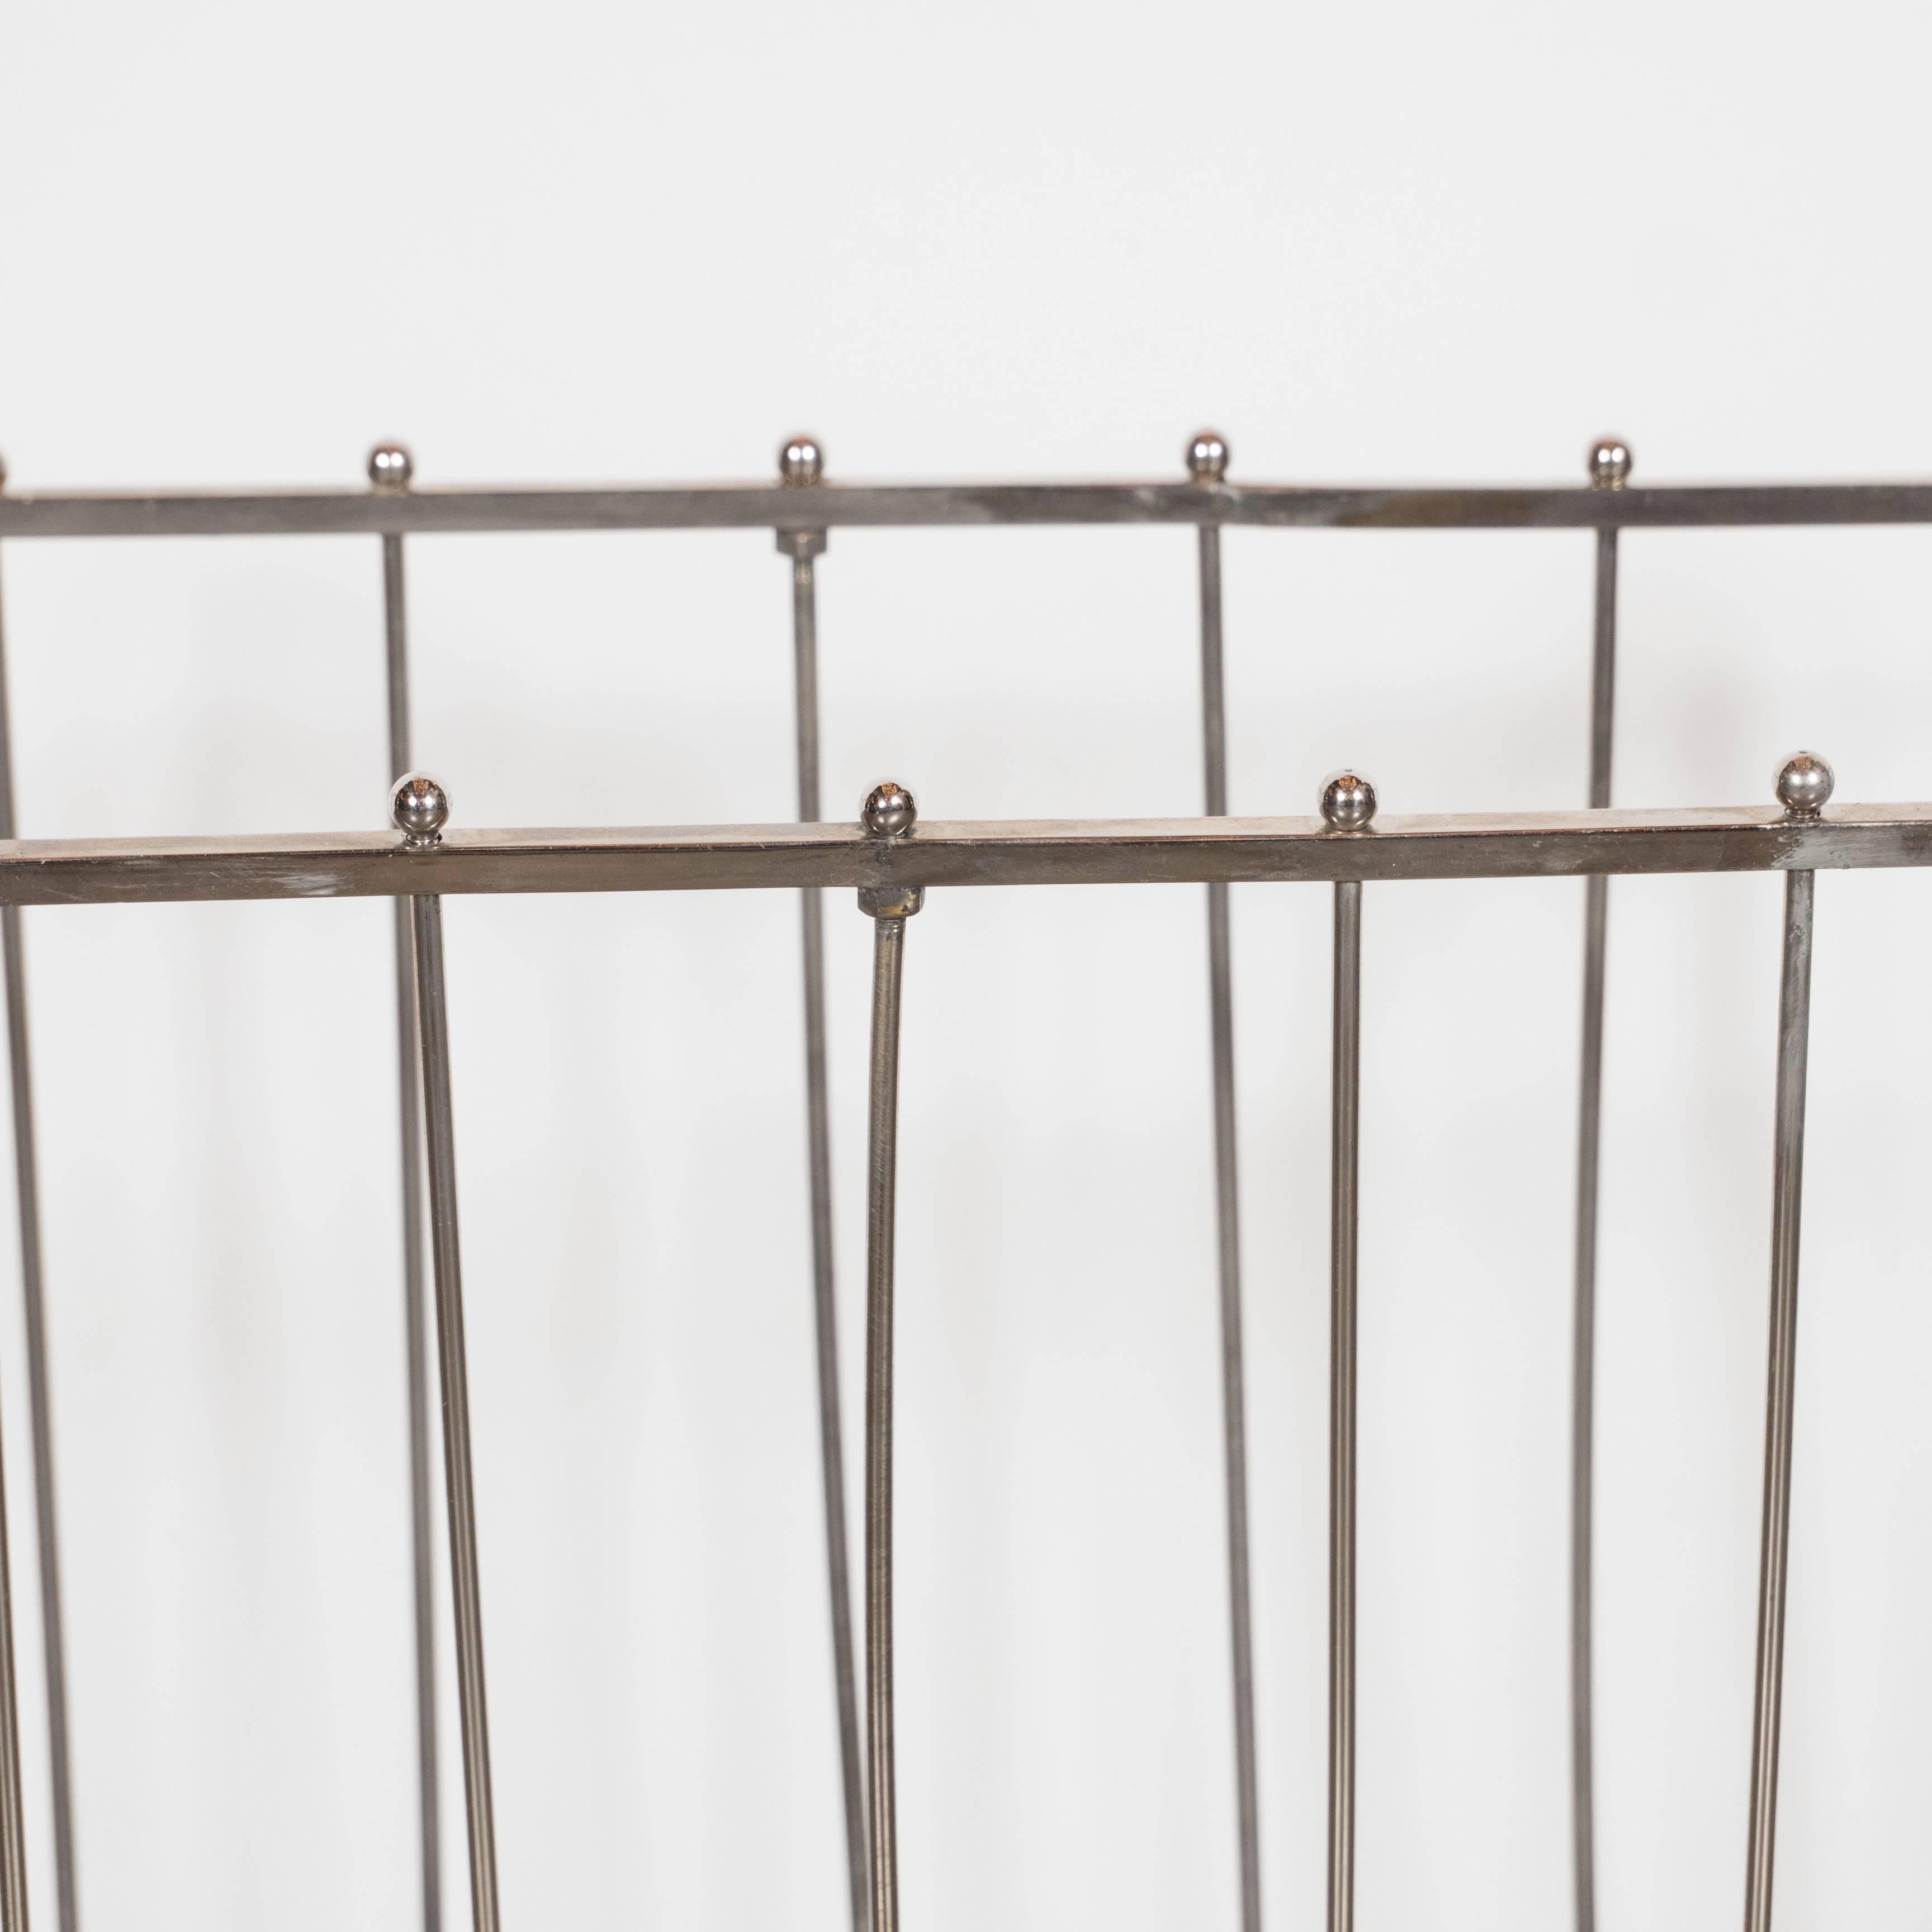 A Mid-Century Modernist nickel ribbed magazine stand with an interesting streamlined ribbed cradle shaped body decorated with ball finials. This Machine Age sculptural magazine rack is constructed as a single stylish unit complete with x shaped